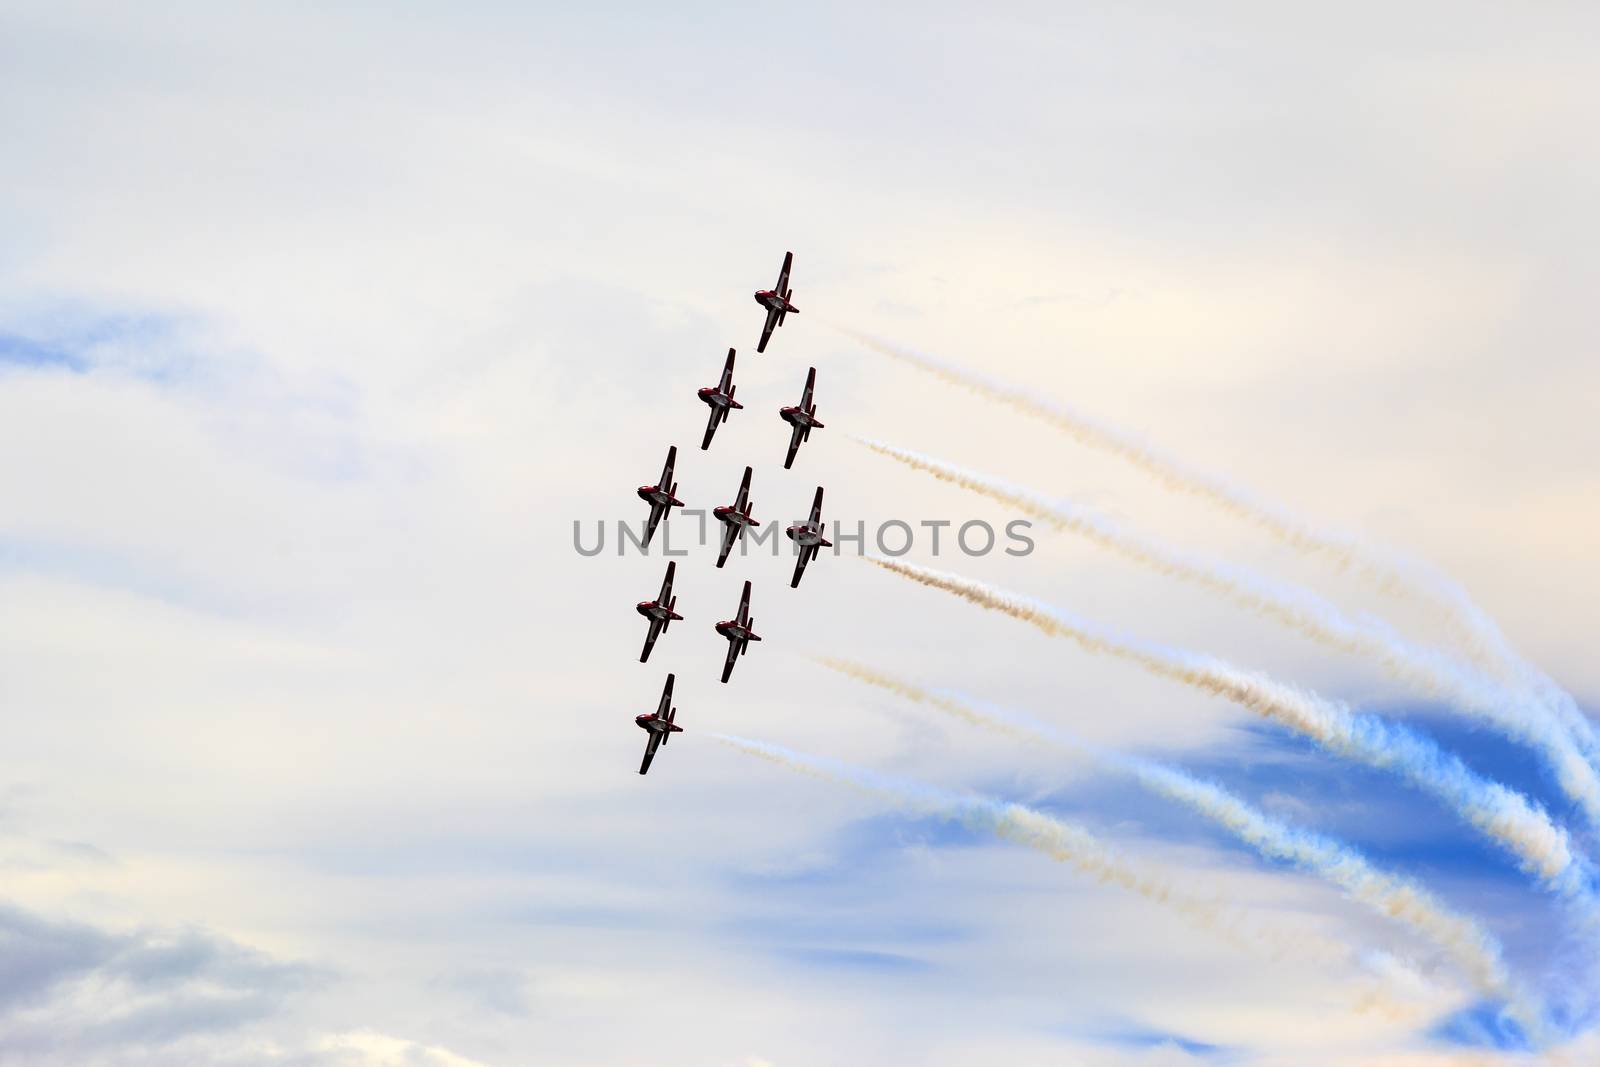 LETHBRIDGE CANADA - JUN 25, 2015: Royal Canadian Air Force CF-18 Hornet tactical fighter aircraft displaying flight agility at the Wing Over Lethbridge  Airshow